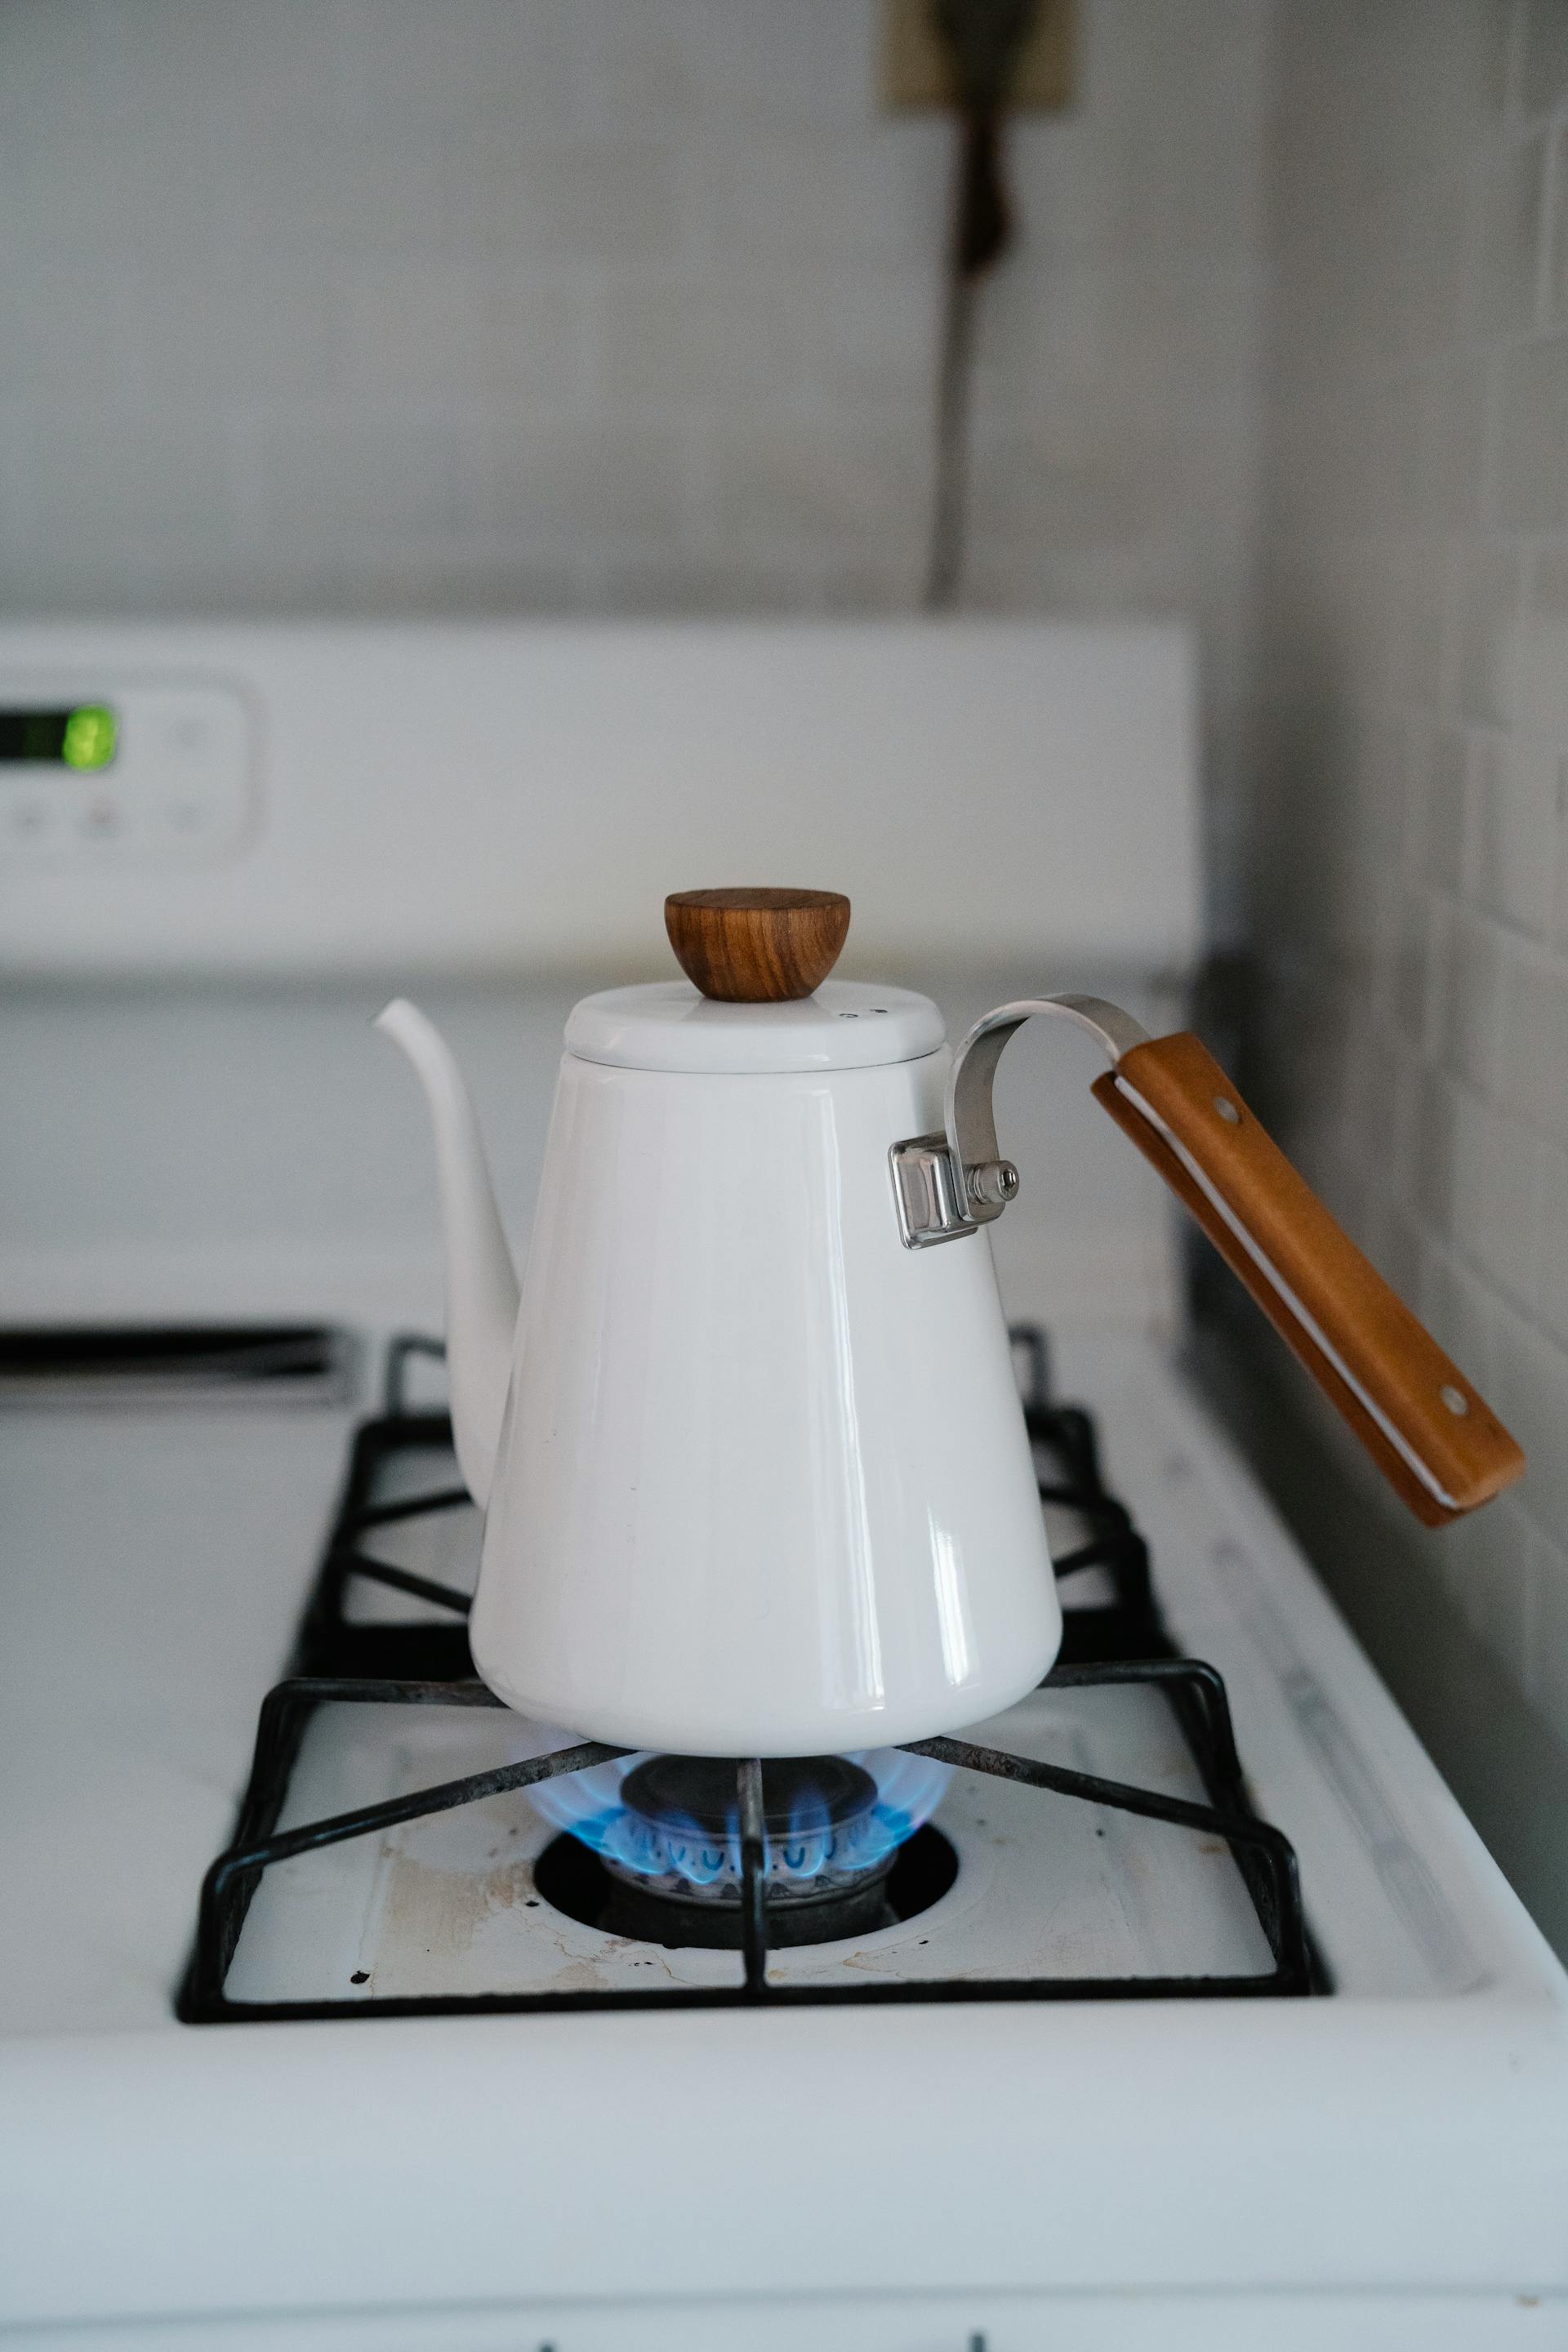 A kettle on a stove | Source: Pexels